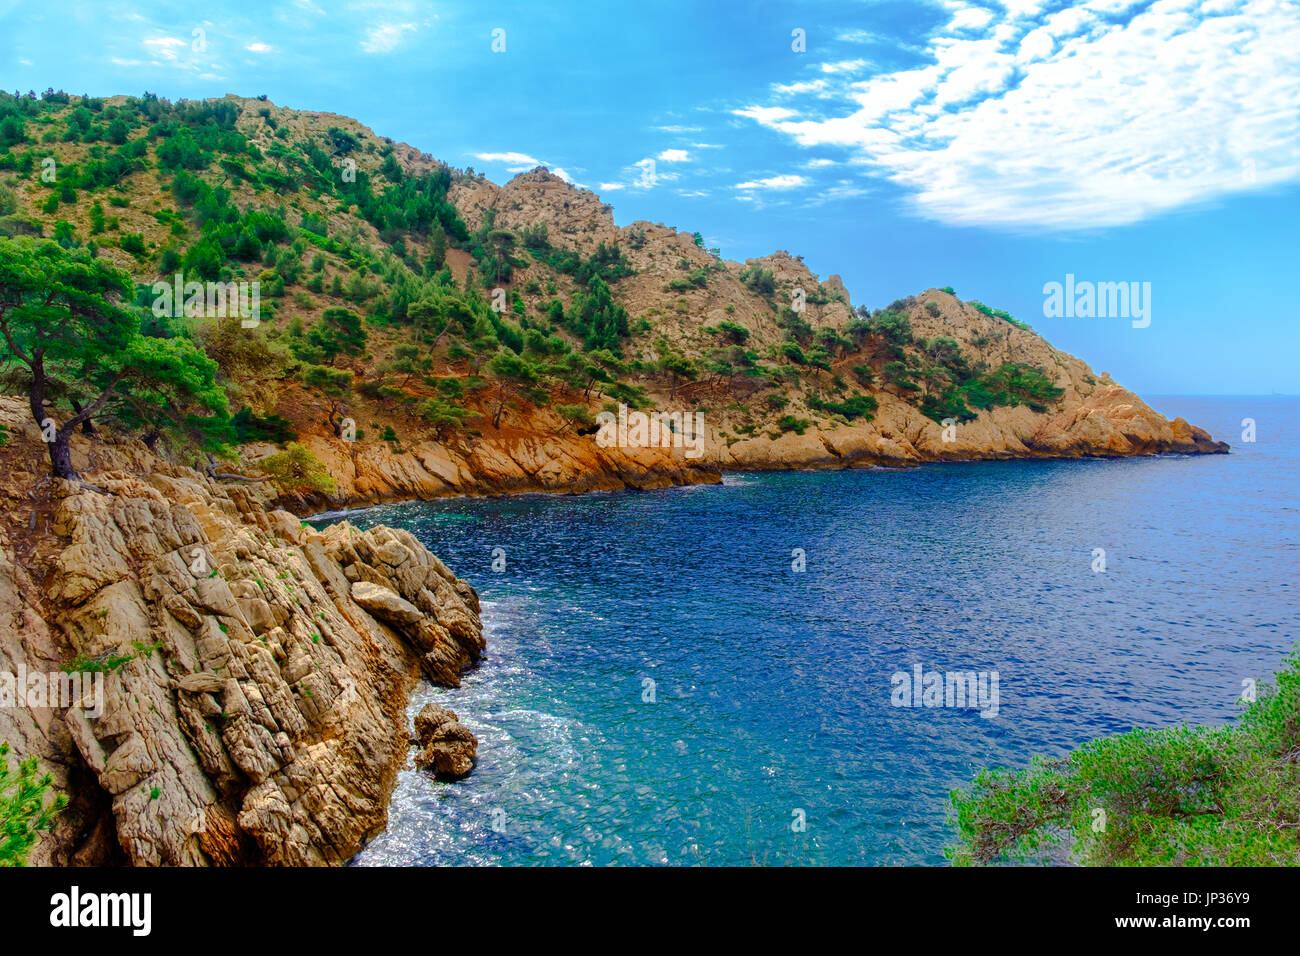 Part of the Estaque mountain range on the Cote Bleue by the Mediterranean Sea, Provence France Stock Photo